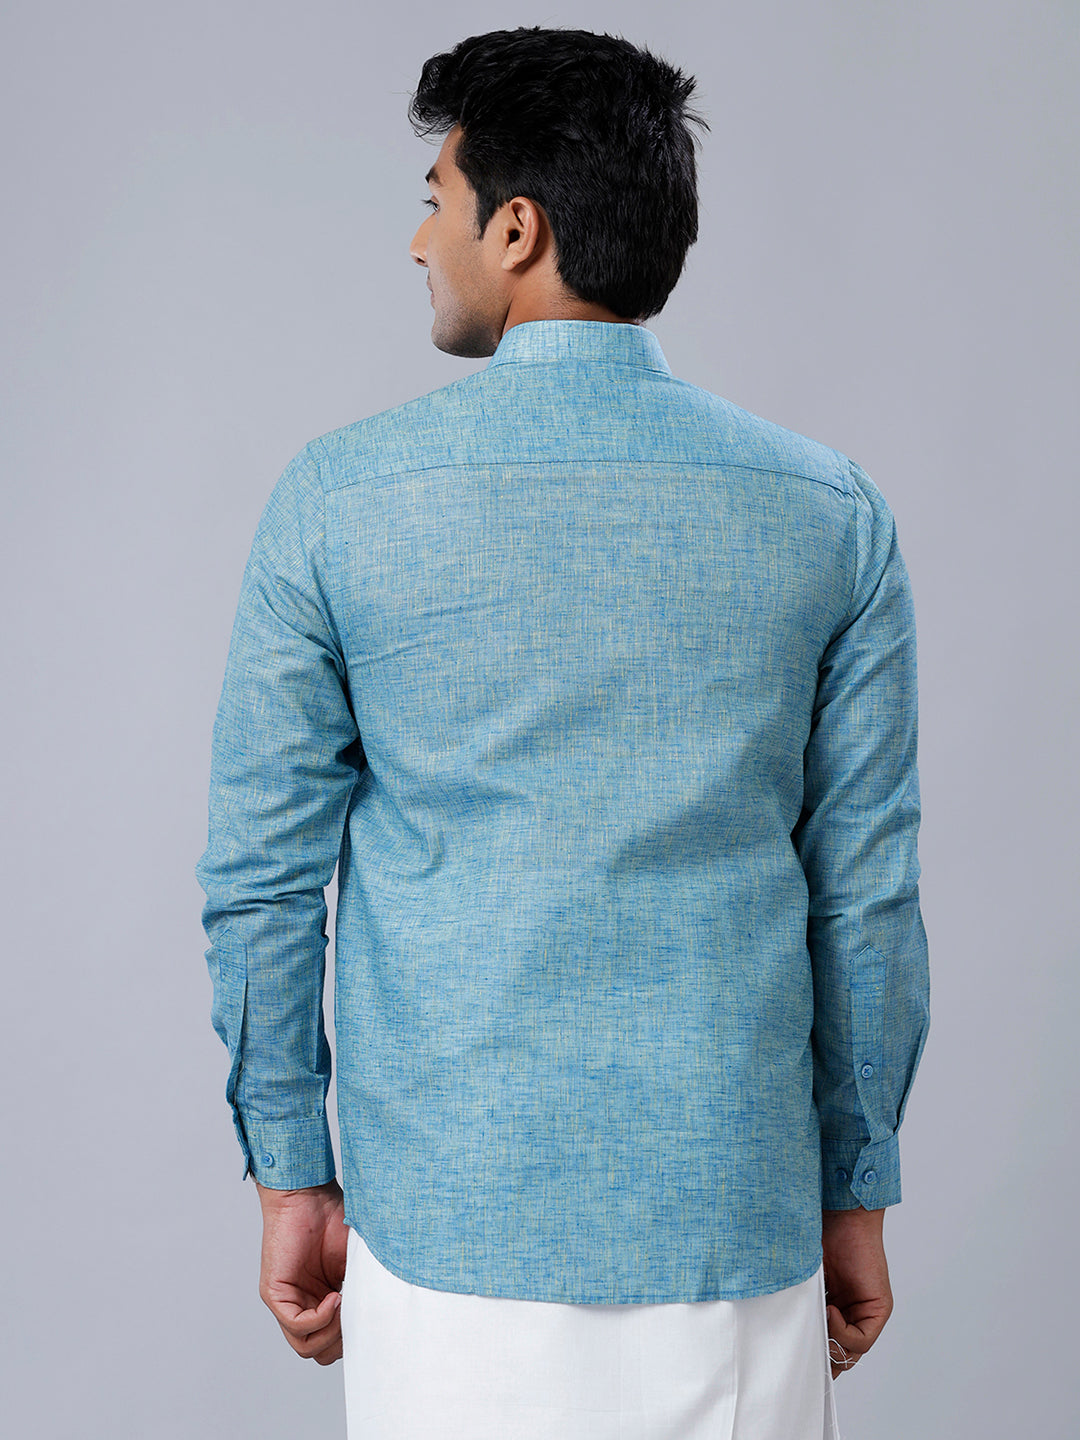 Mens Formal Shirt Full Sleeves Blue T39 TO5-Back view